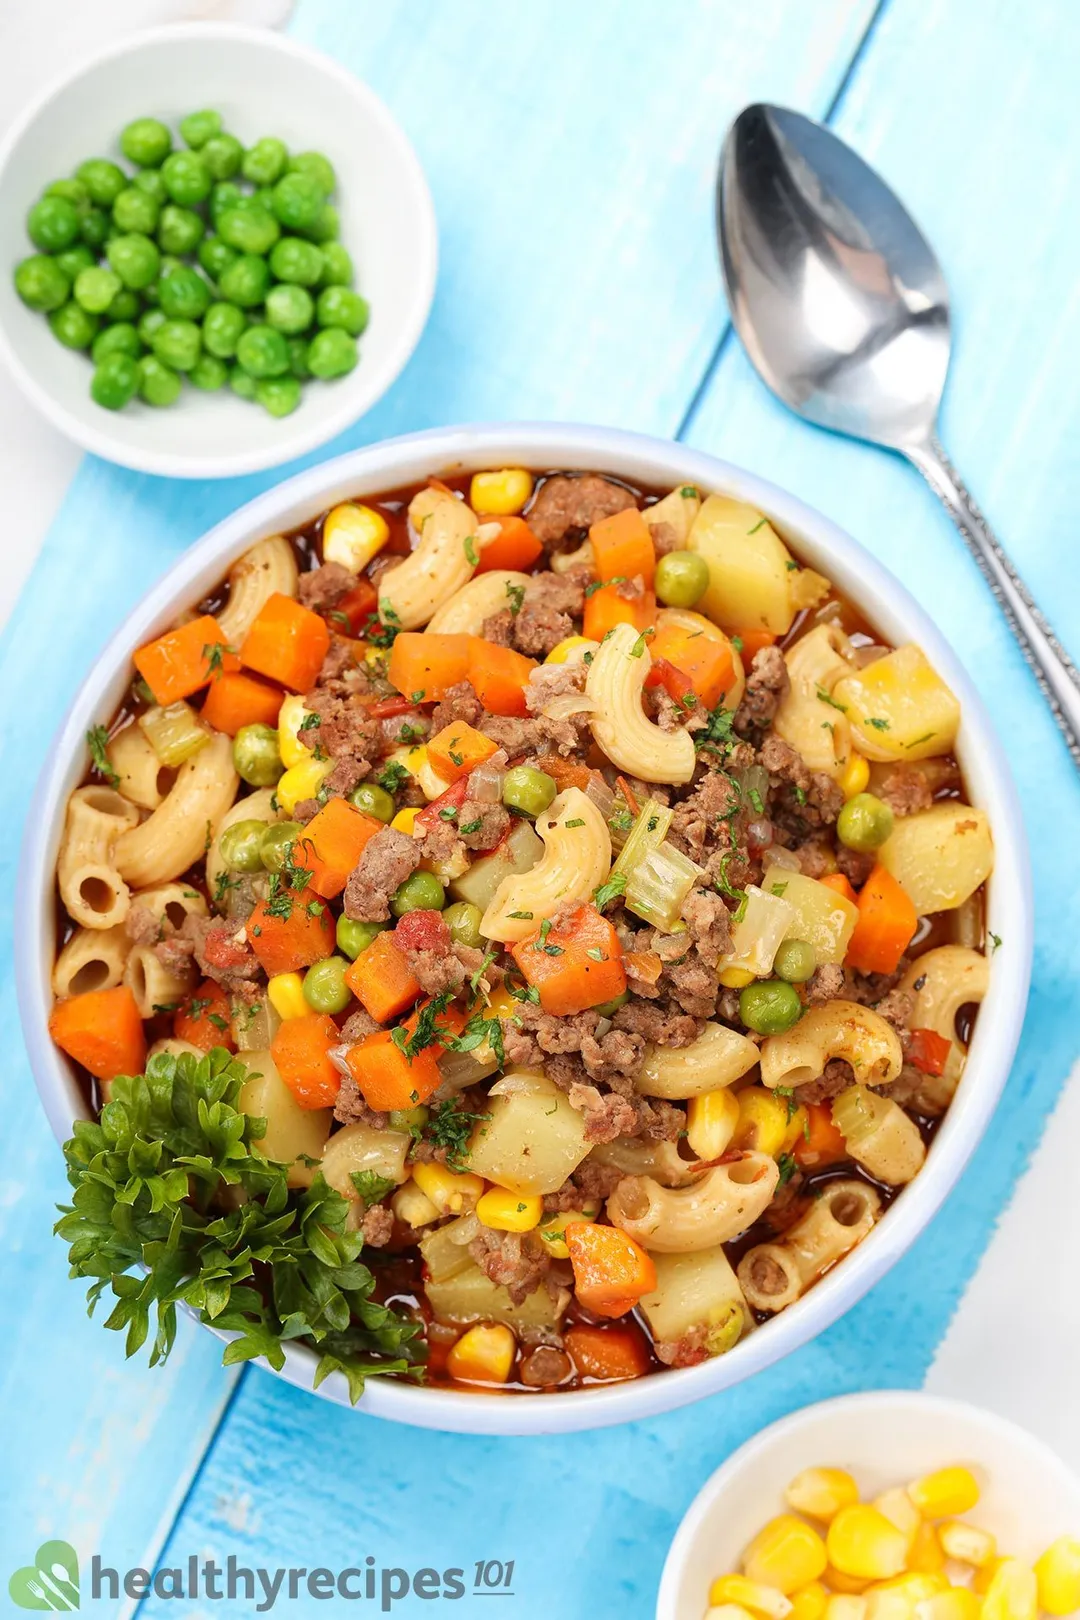 top view of a bowl of cooked ground beef with pasta, carrot and potatoes cubed, green bean, corn garnished with a spoon, a small bowl of green bean, corn